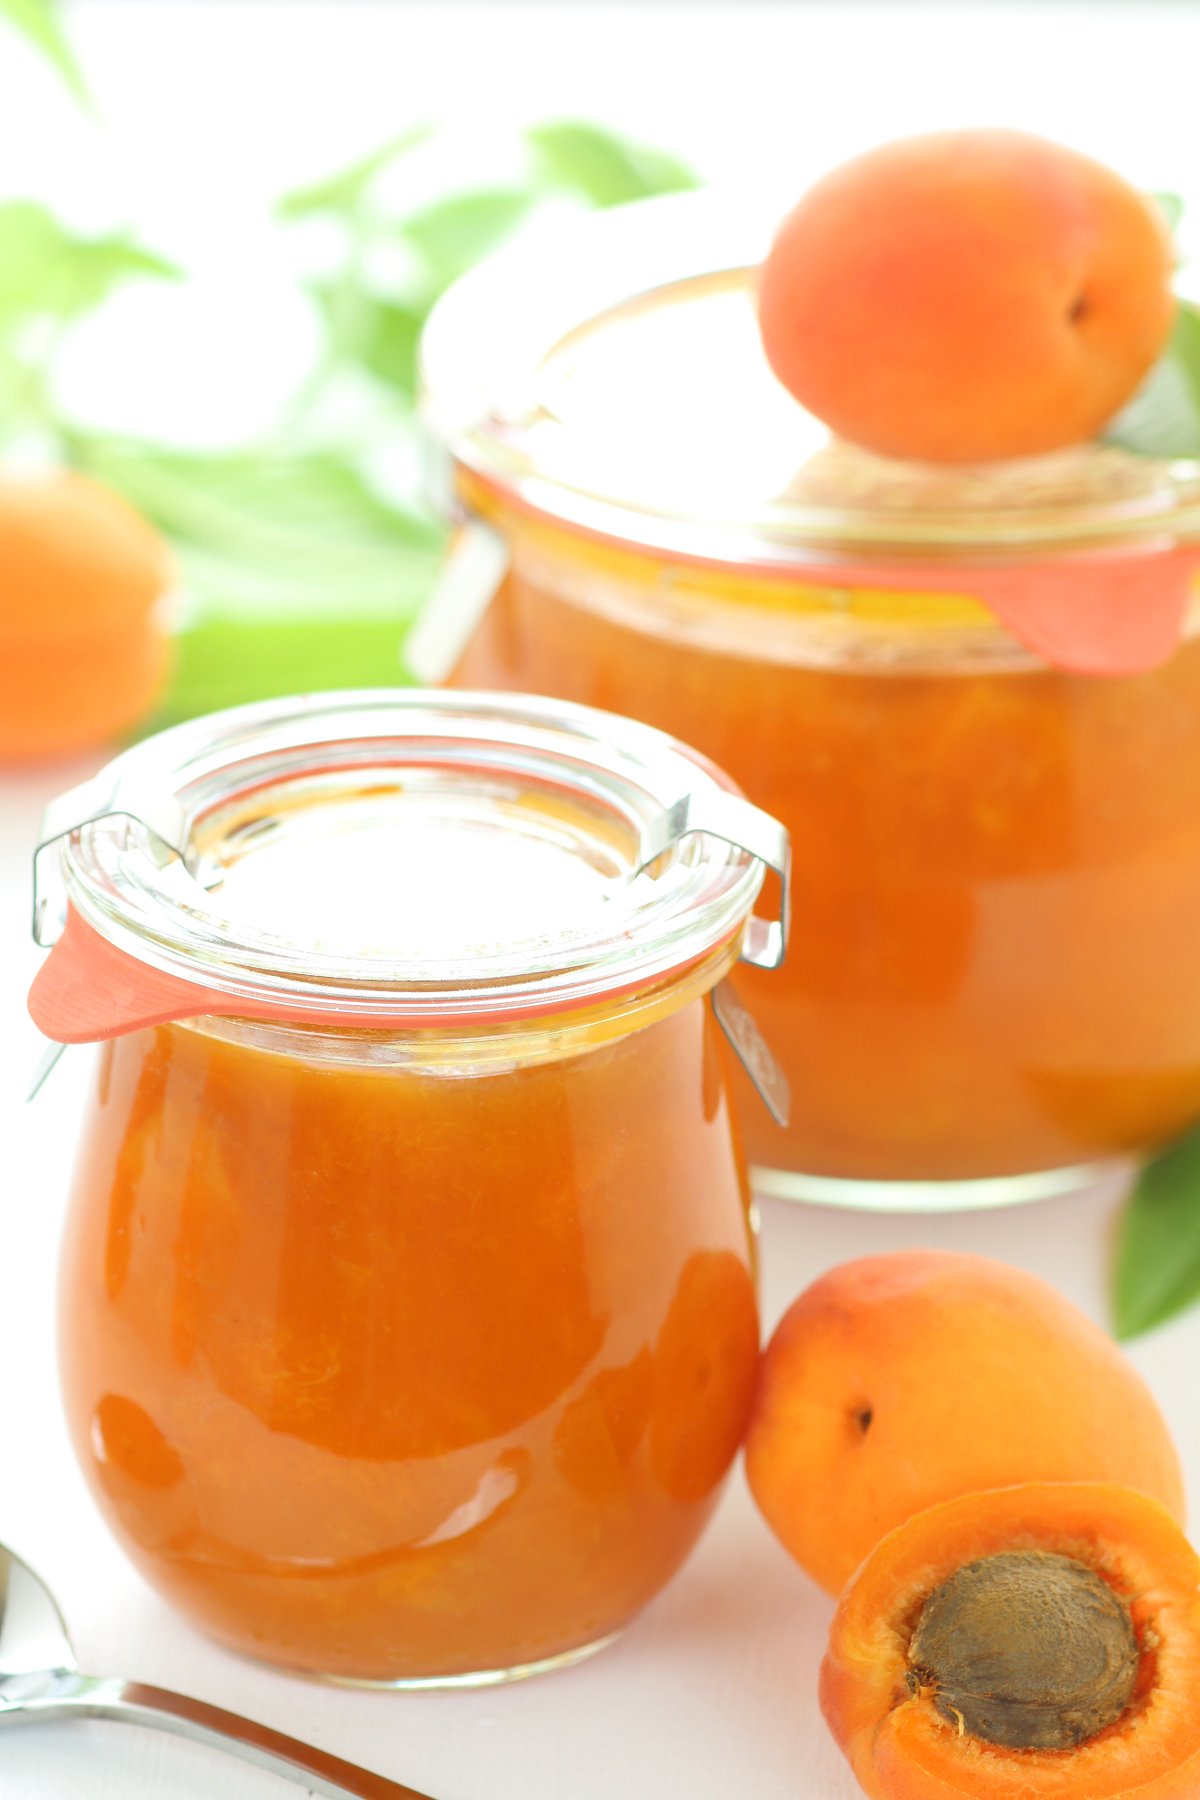 A simple, 3-ingredient recipe for homemade Apricot Jam. Spoon onto vegan yogurt, use as a filling for cakes or other desserts, or serve as is on the breakfast table!